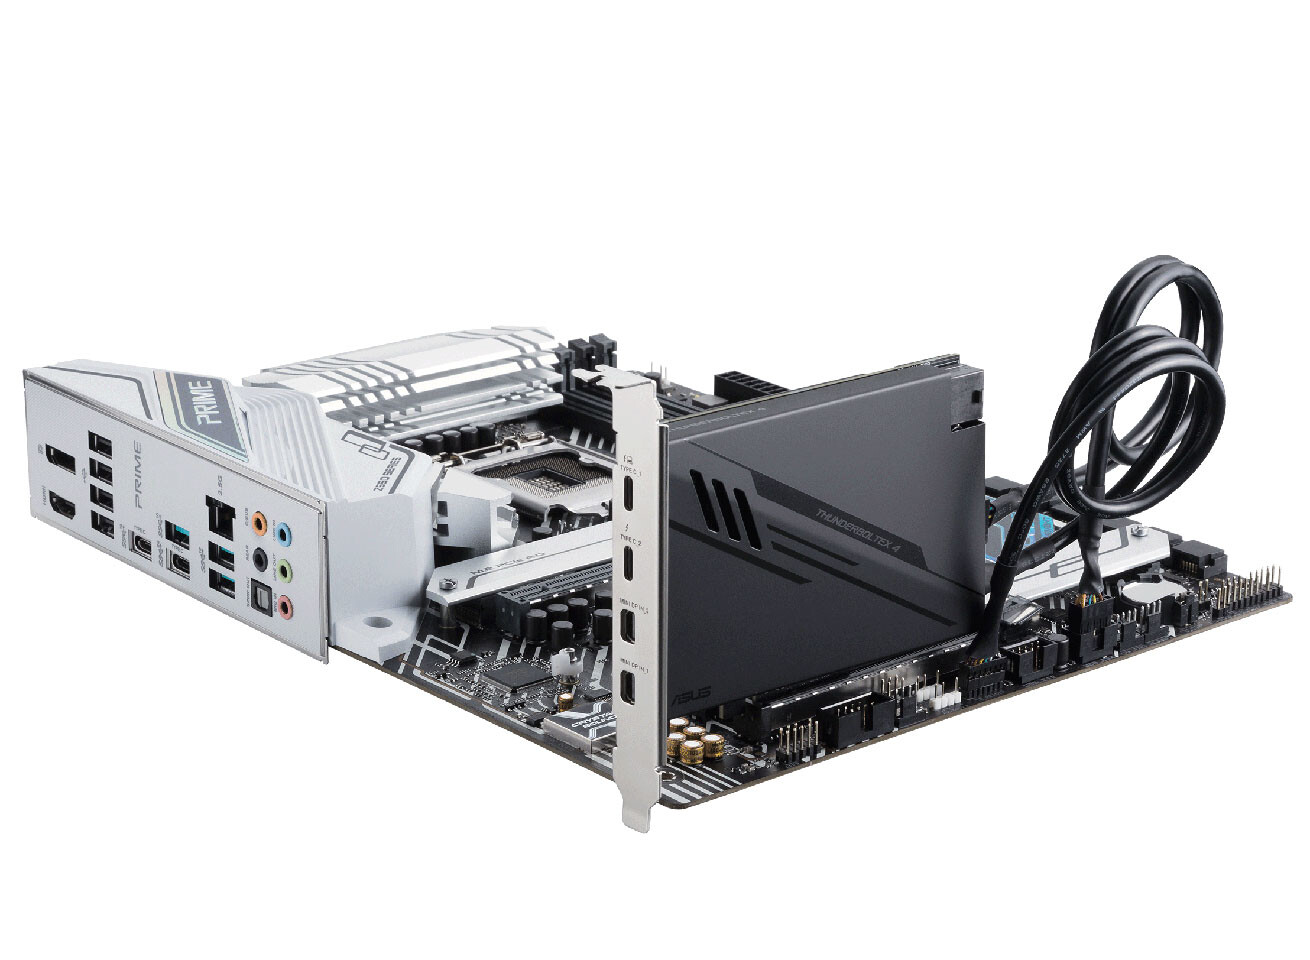 gigabyte motherboard thunderbolt add in card connector